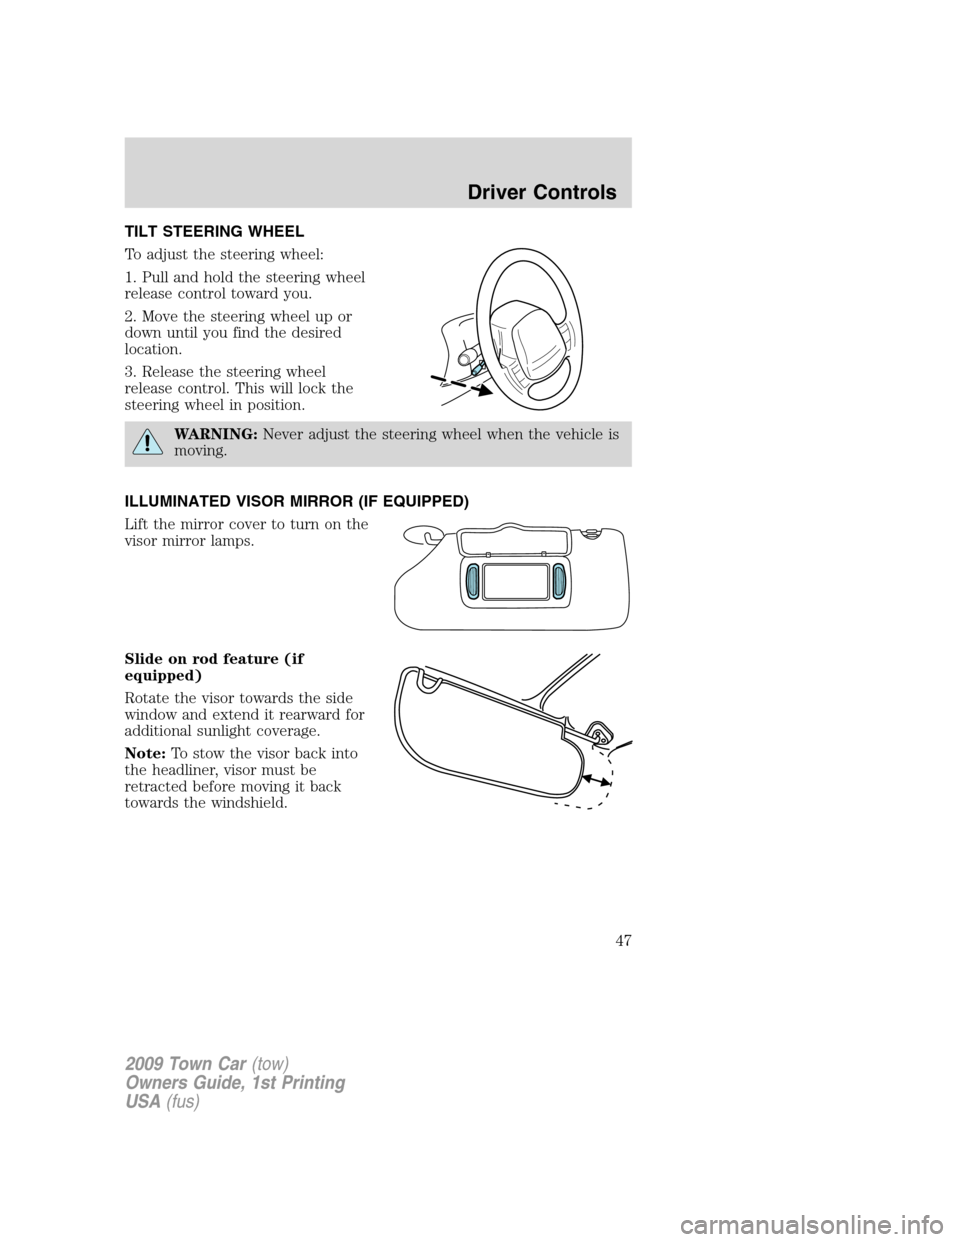 LINCOLN TOWN CAR 2009 User Guide TILT STEERING WHEEL
To adjust the steering wheel:
1. Pull and hold the steering wheel
release control toward you.
2. Move the steering wheel up or
down until you find the desired
location.
3. Release 